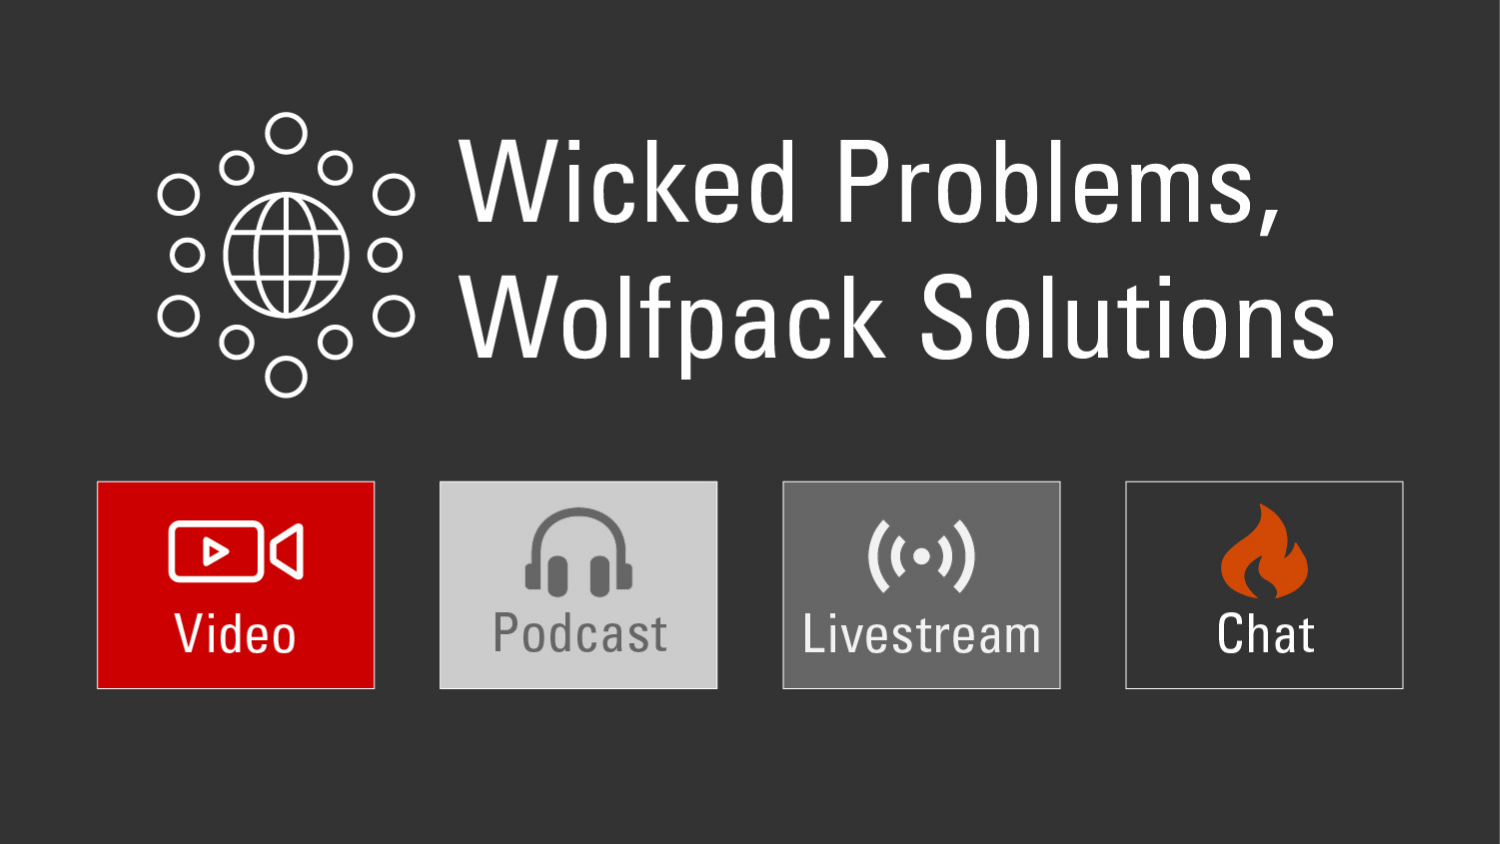 Wicked Problems, Wolfpack Solutions graphic created by Lead Multimedia Designer Rich Gurnsey.